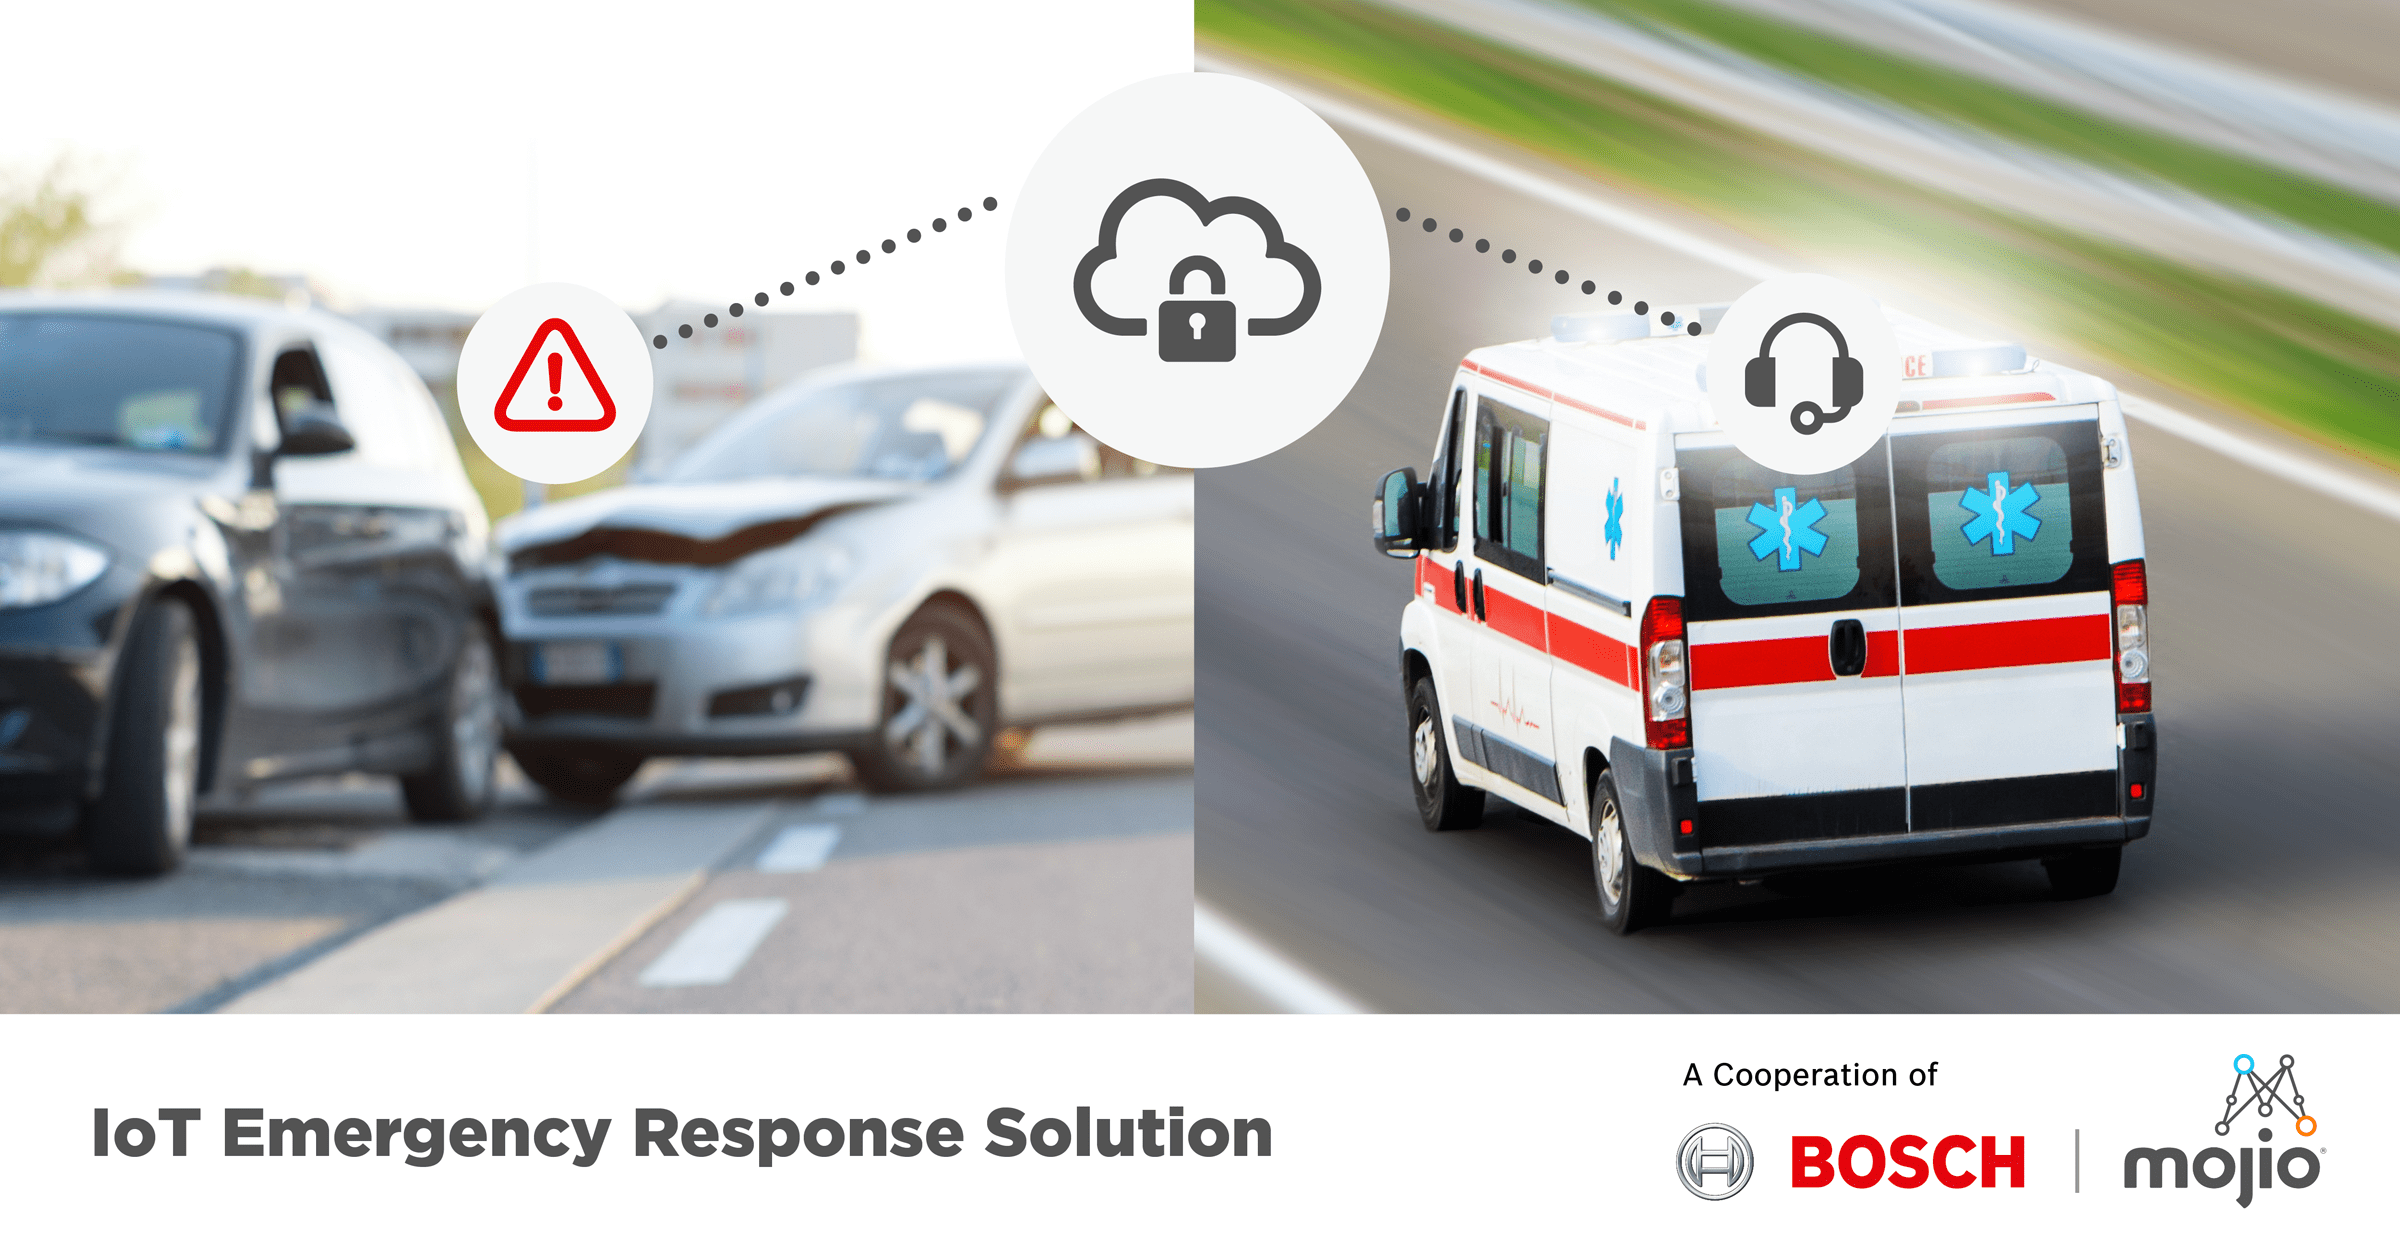 Bosch Mojio Introduce Emergency Response Solution For Connected Cars